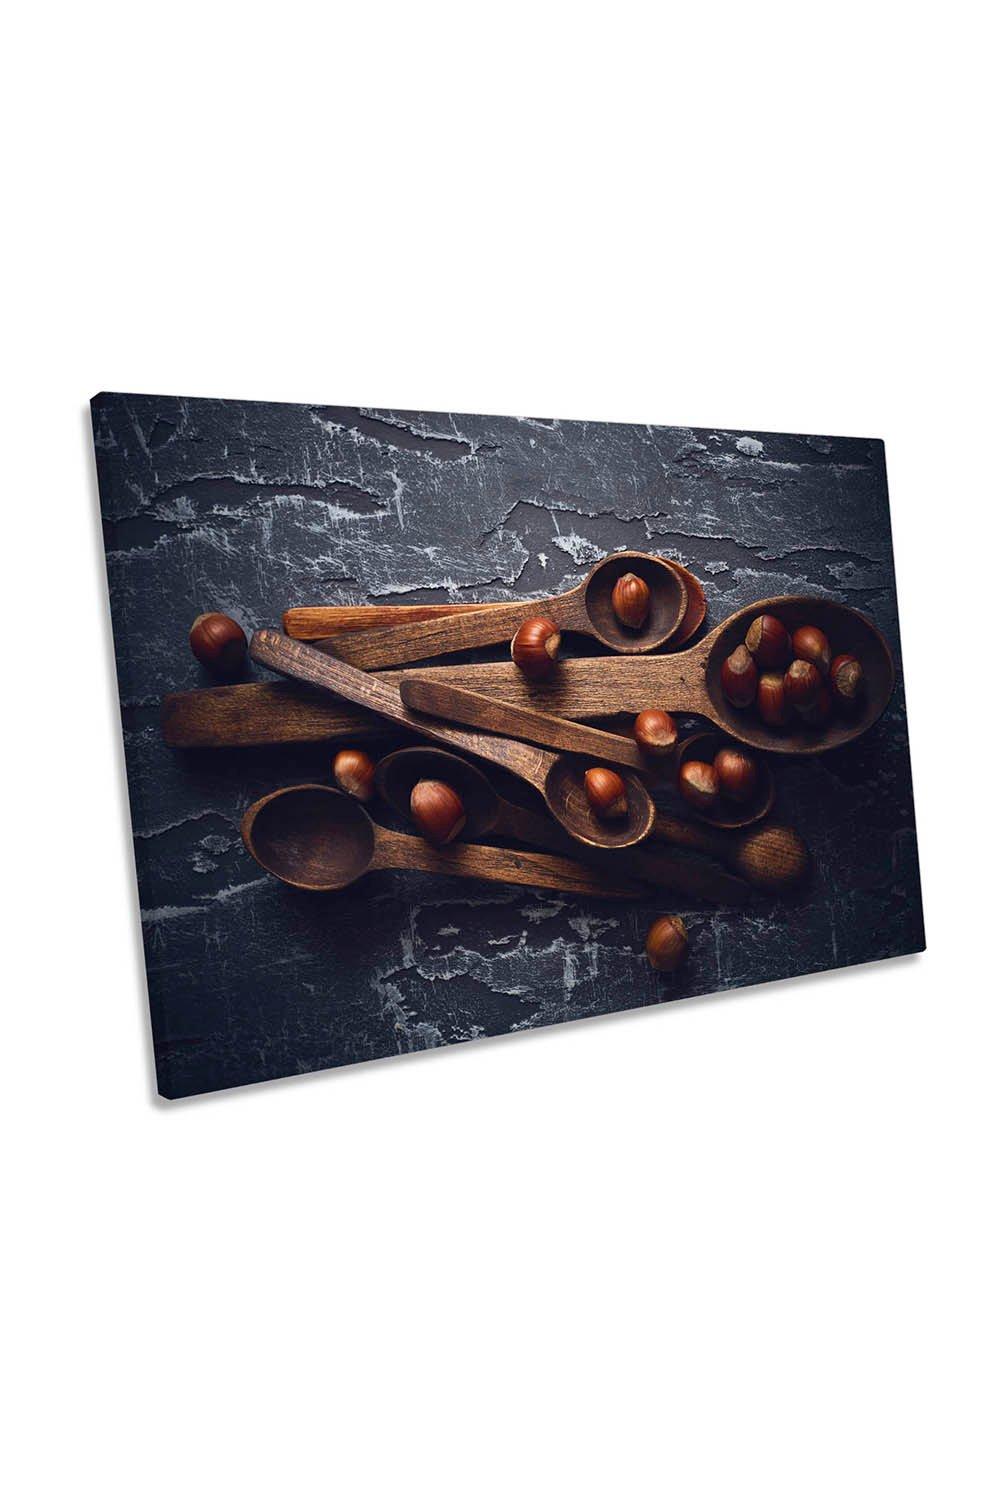 Hazel Nuts Spoons Brown Kitchen Canvas Wall Art Picture Print